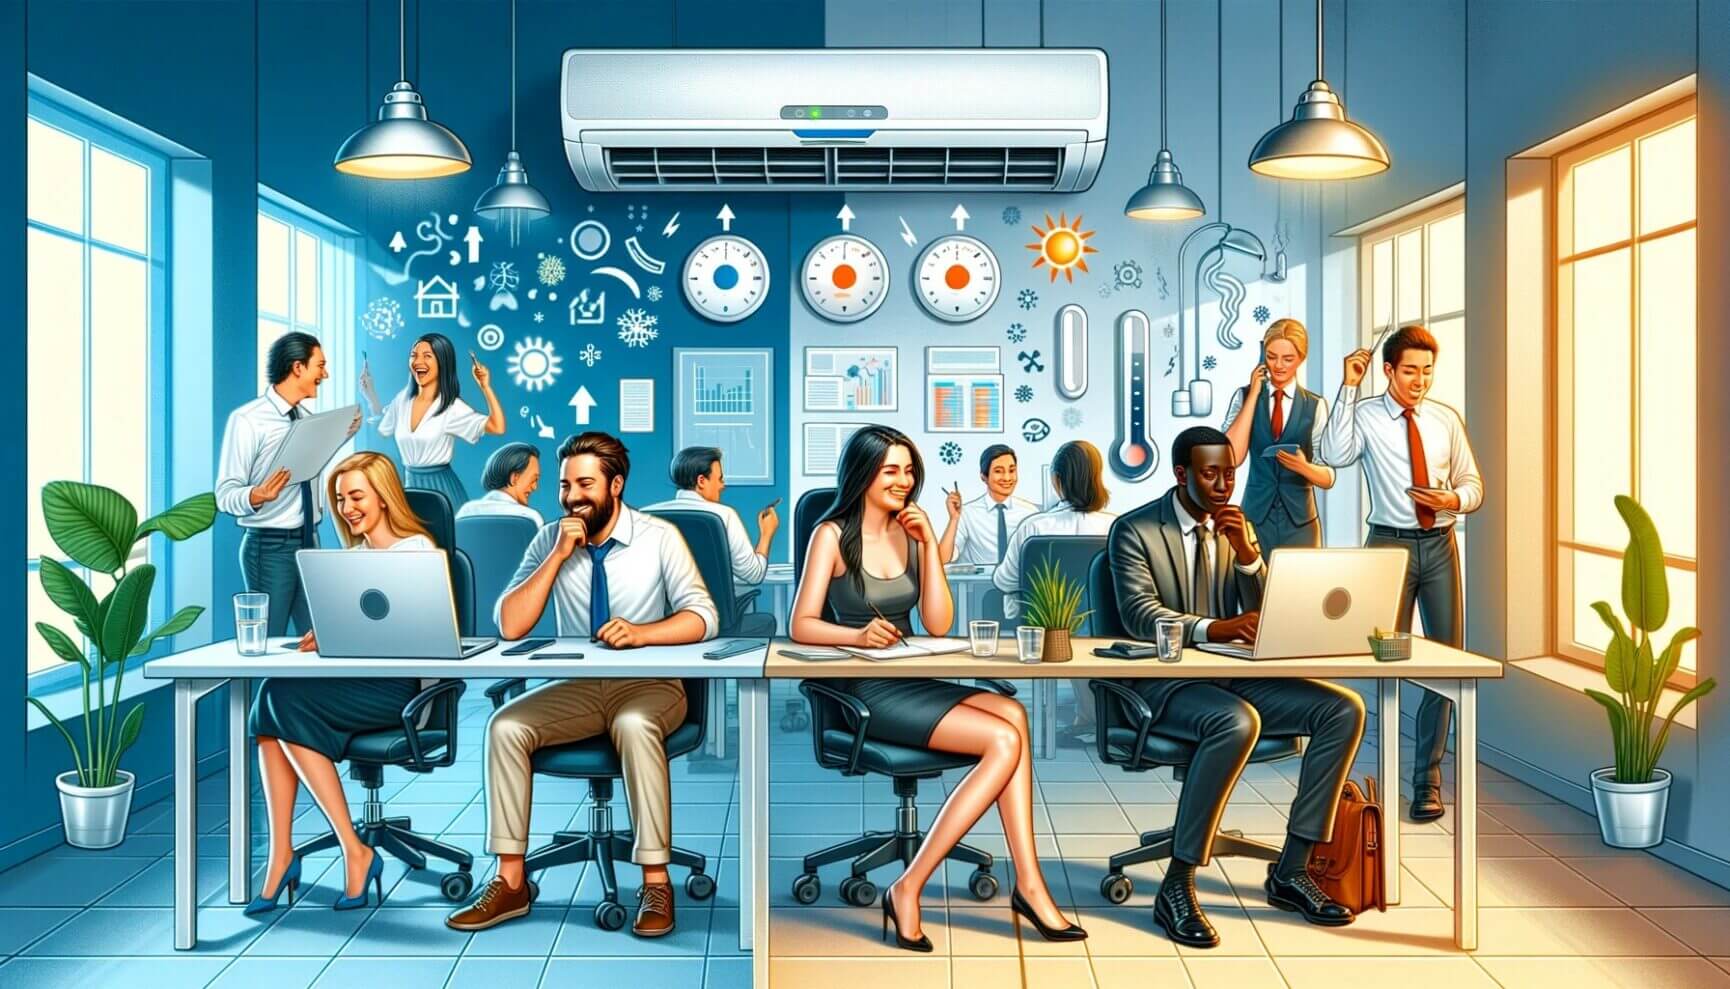 A group of people working in an office.